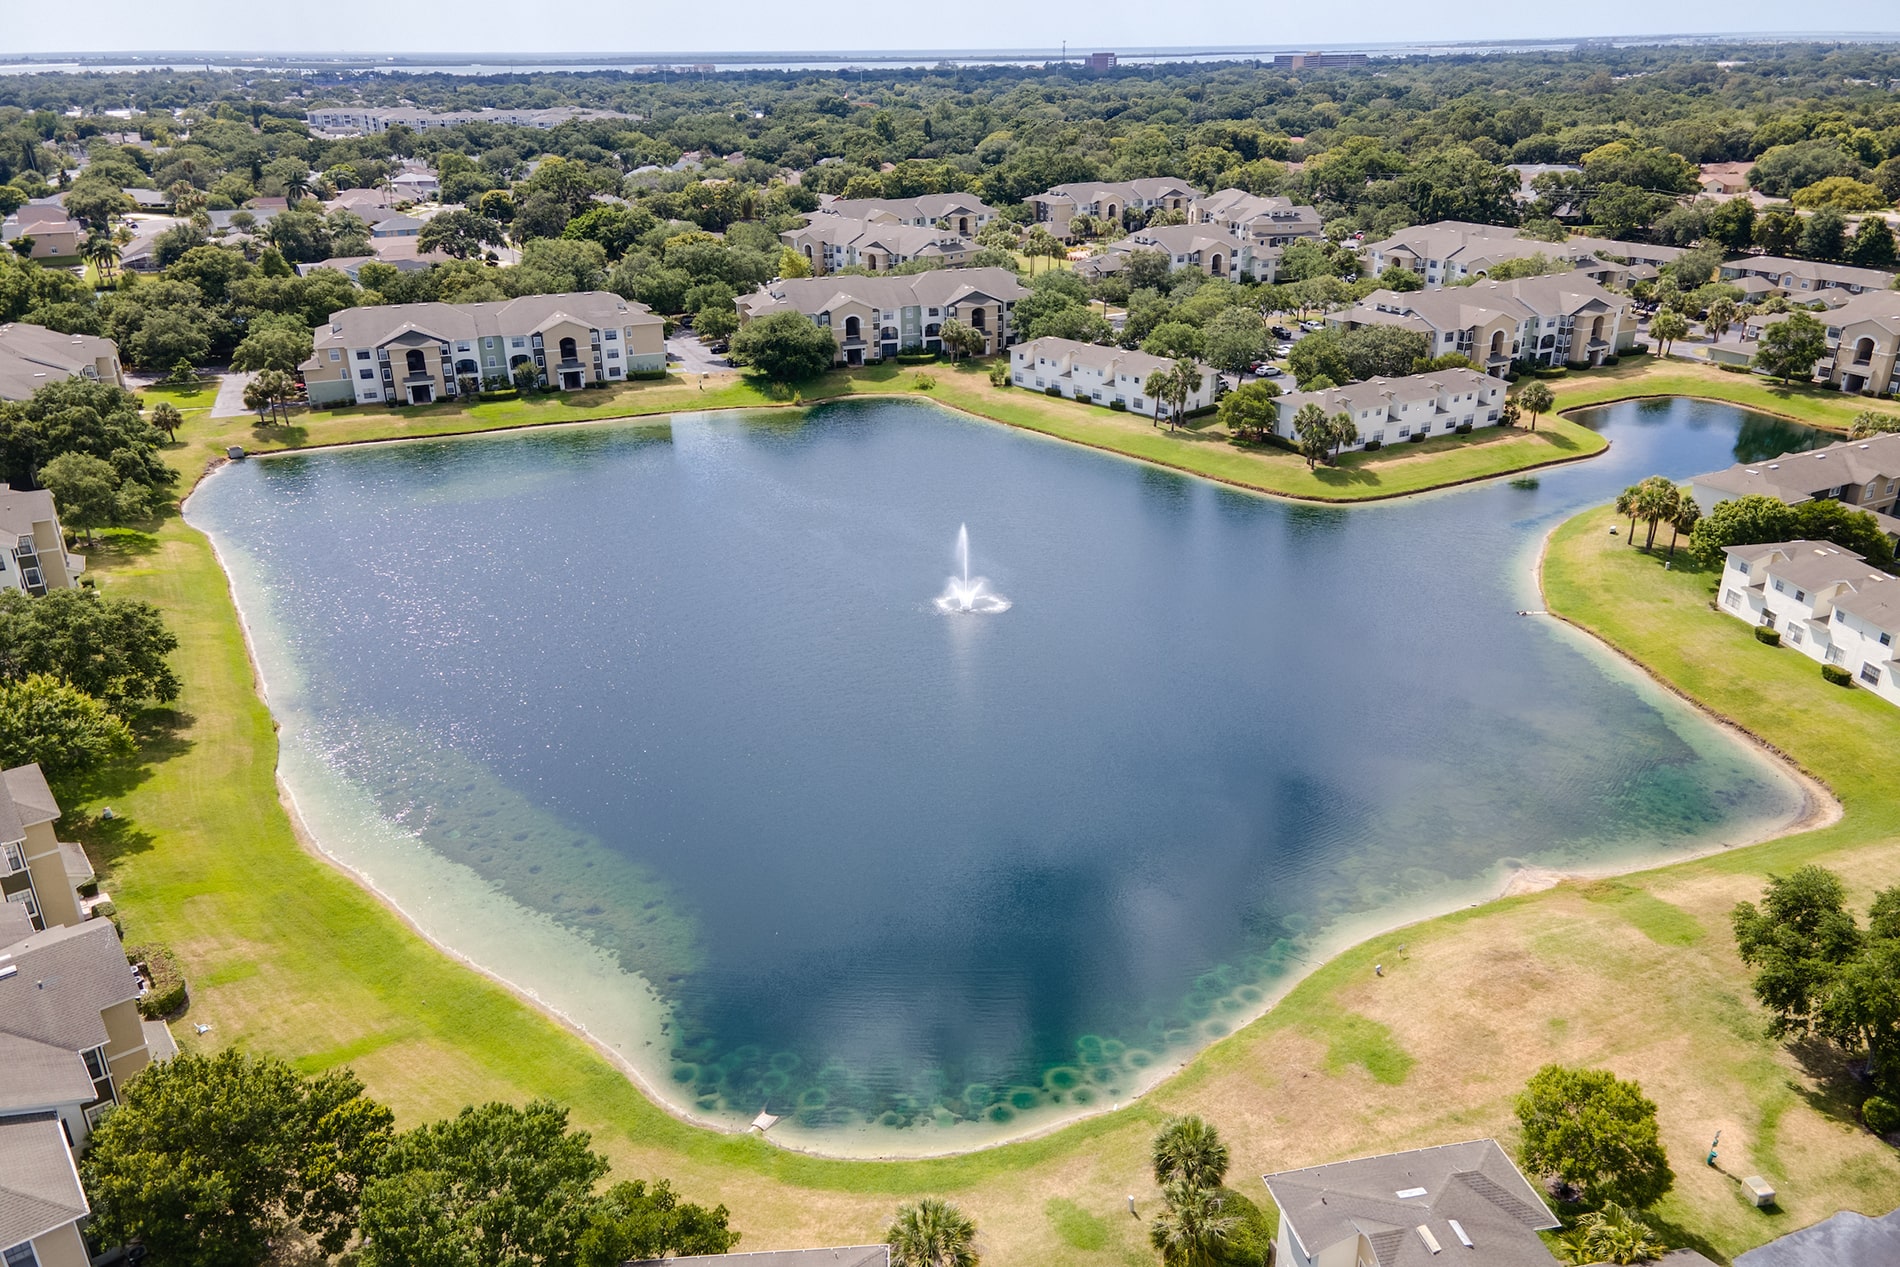 MacAlpine Place lake drone view